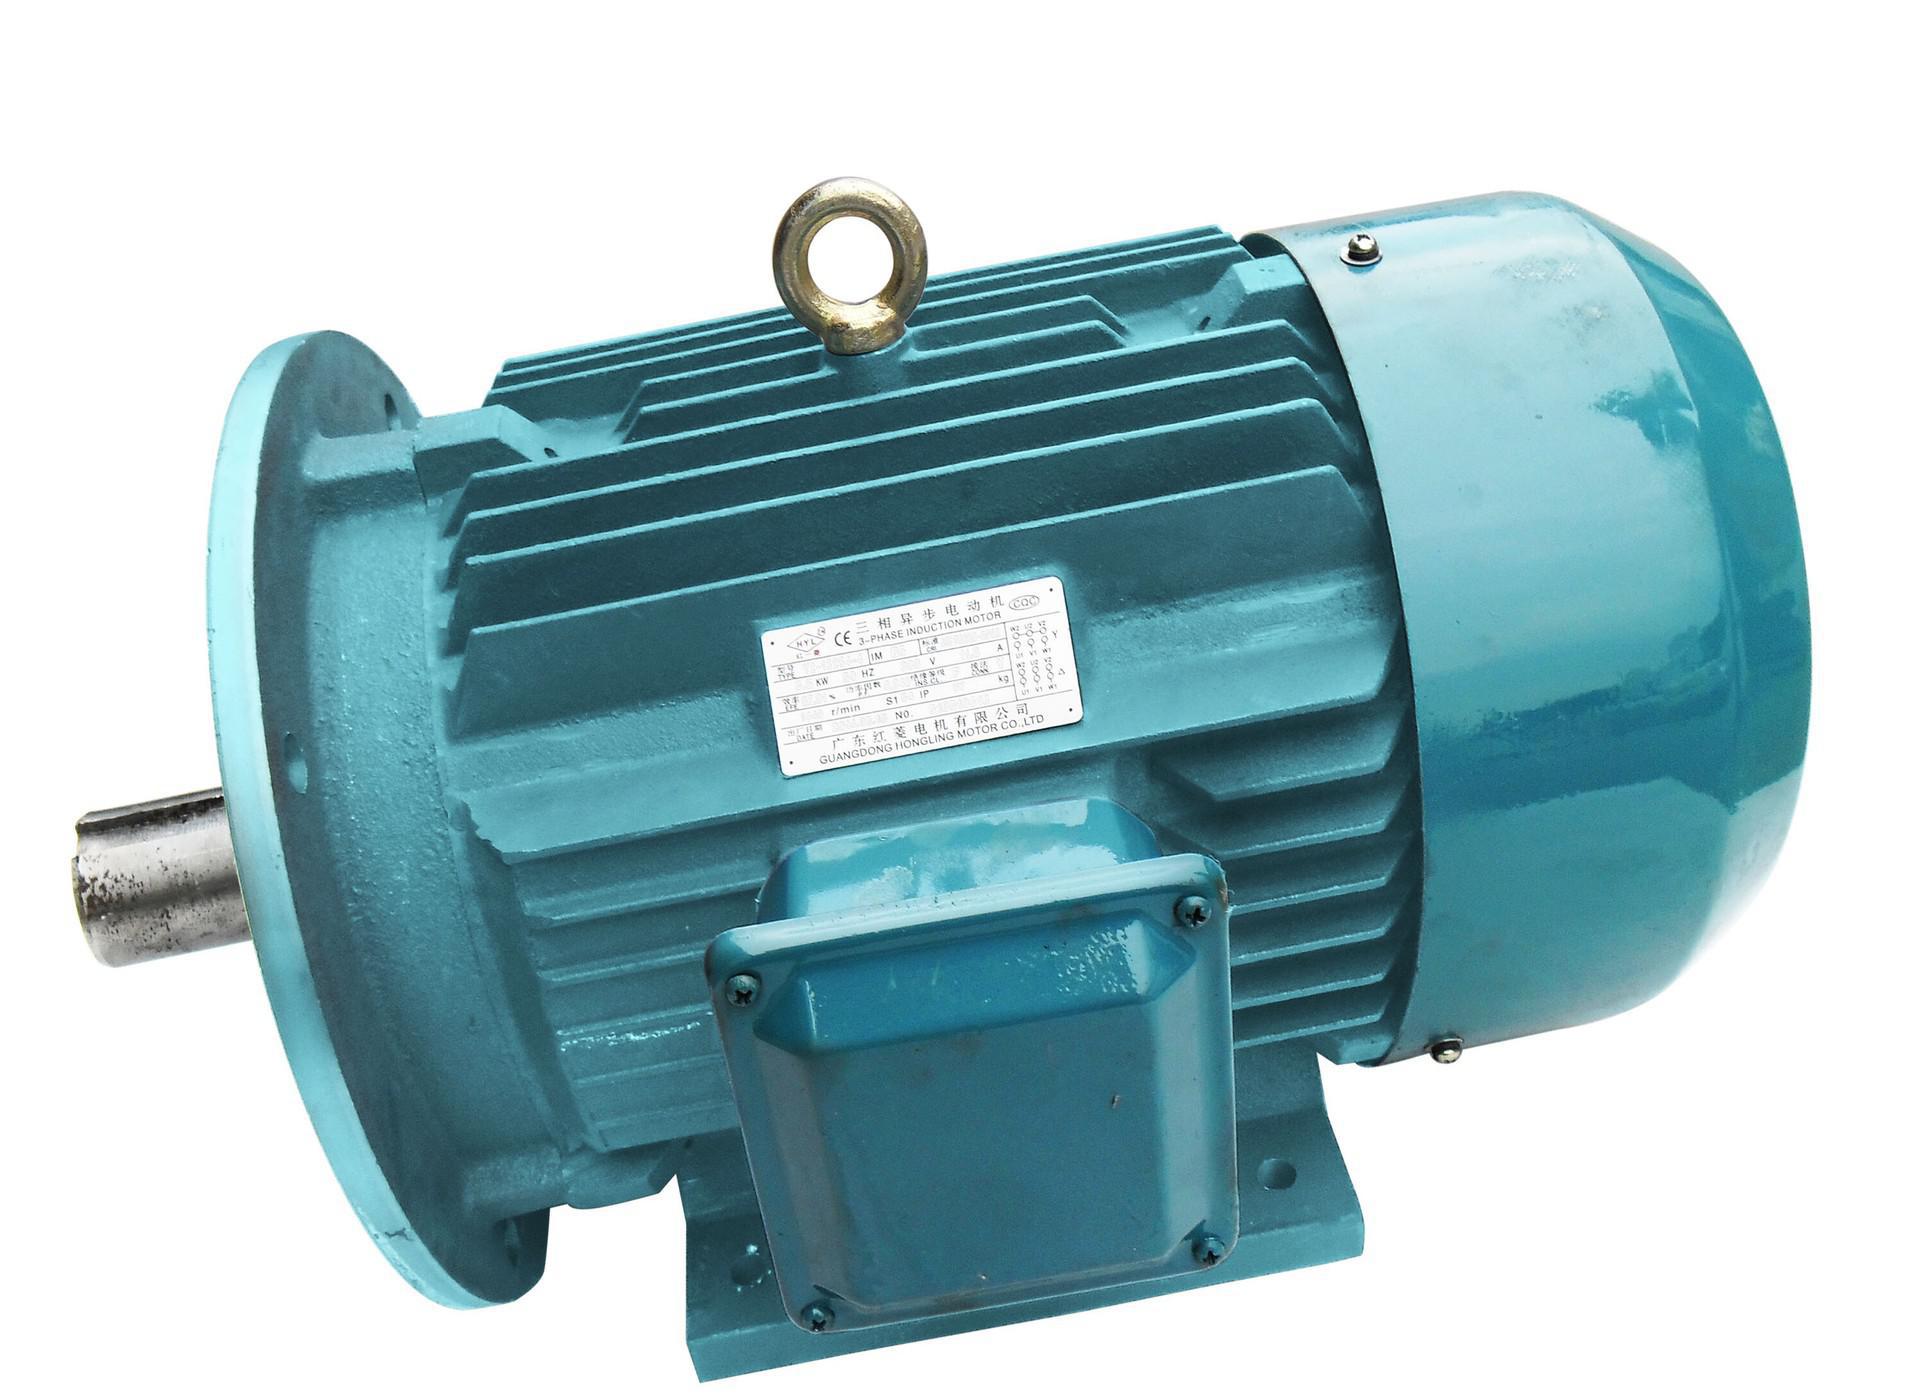 Single phase induction motor manufacturers in india